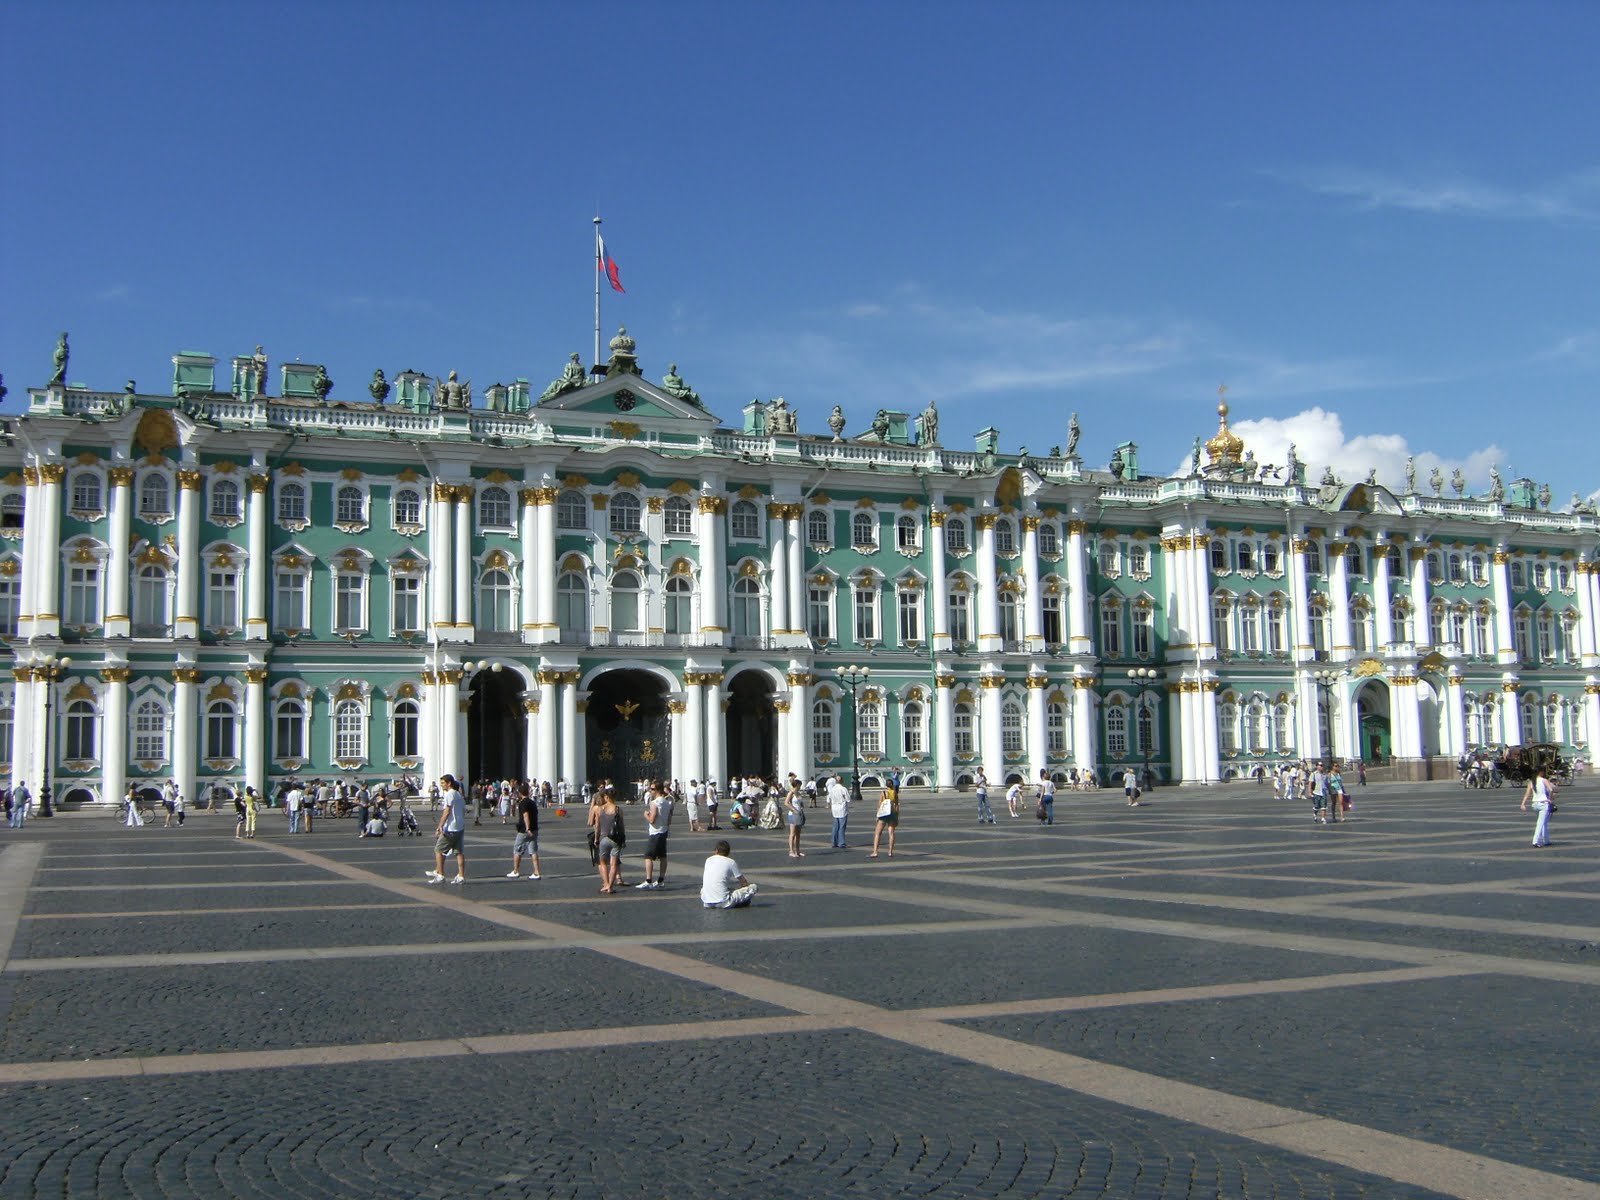 The Ermitage Winter Palace in Russia.